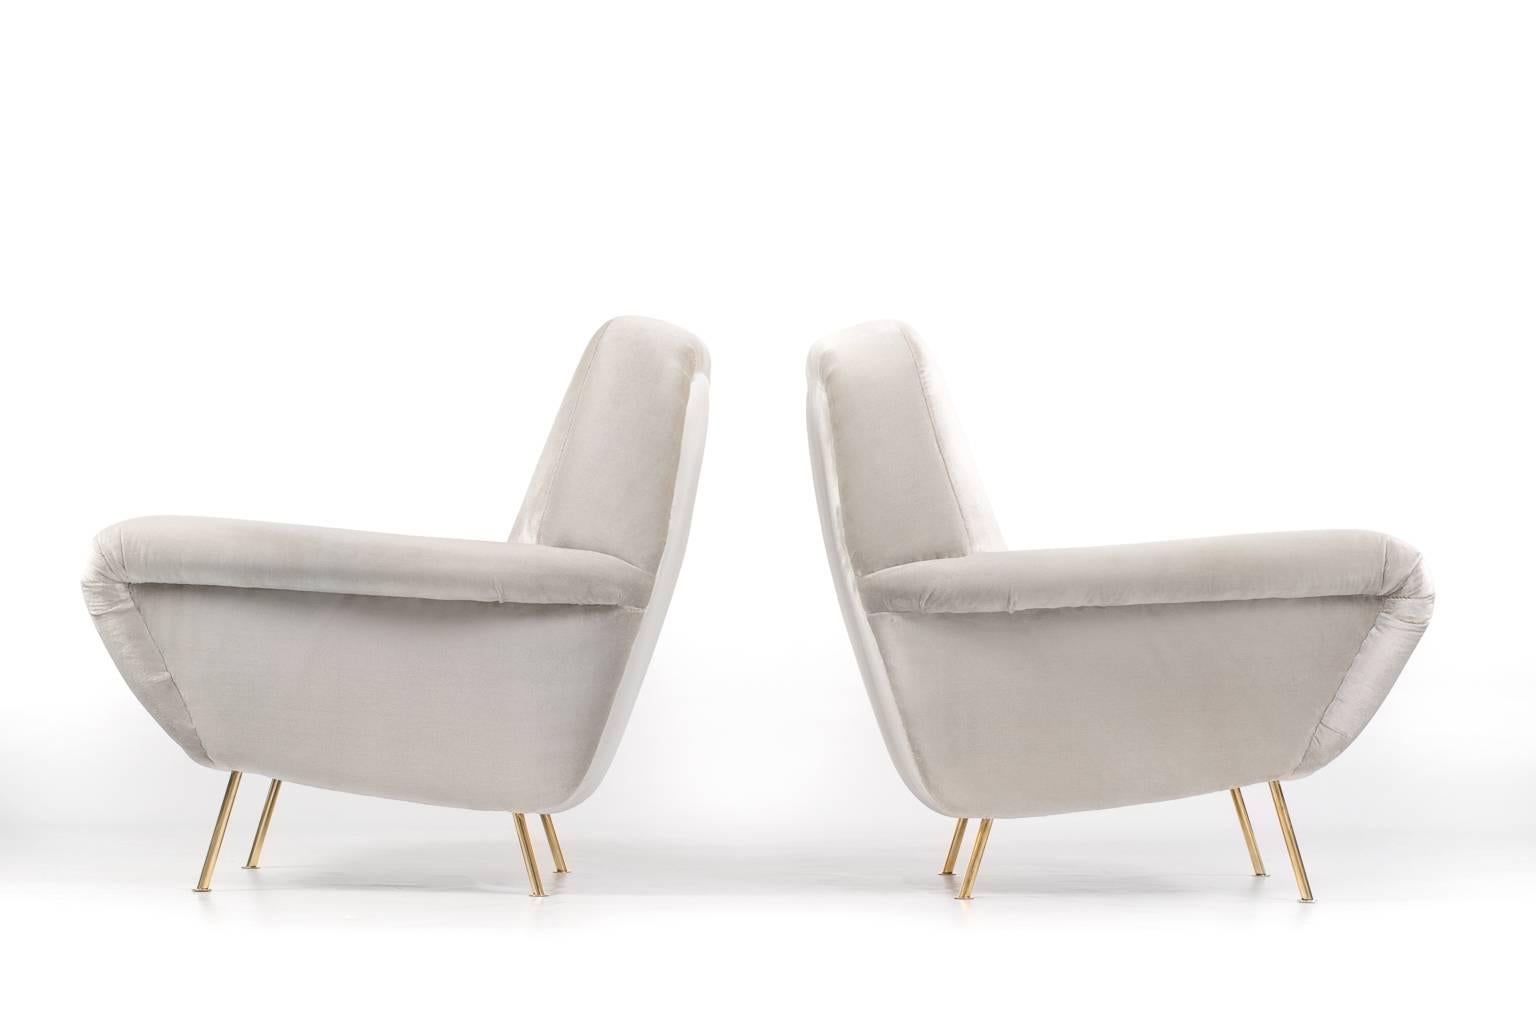 Italian Pair of Armchairs by Gianfranco Frattini for Cassina, Italy, 1954